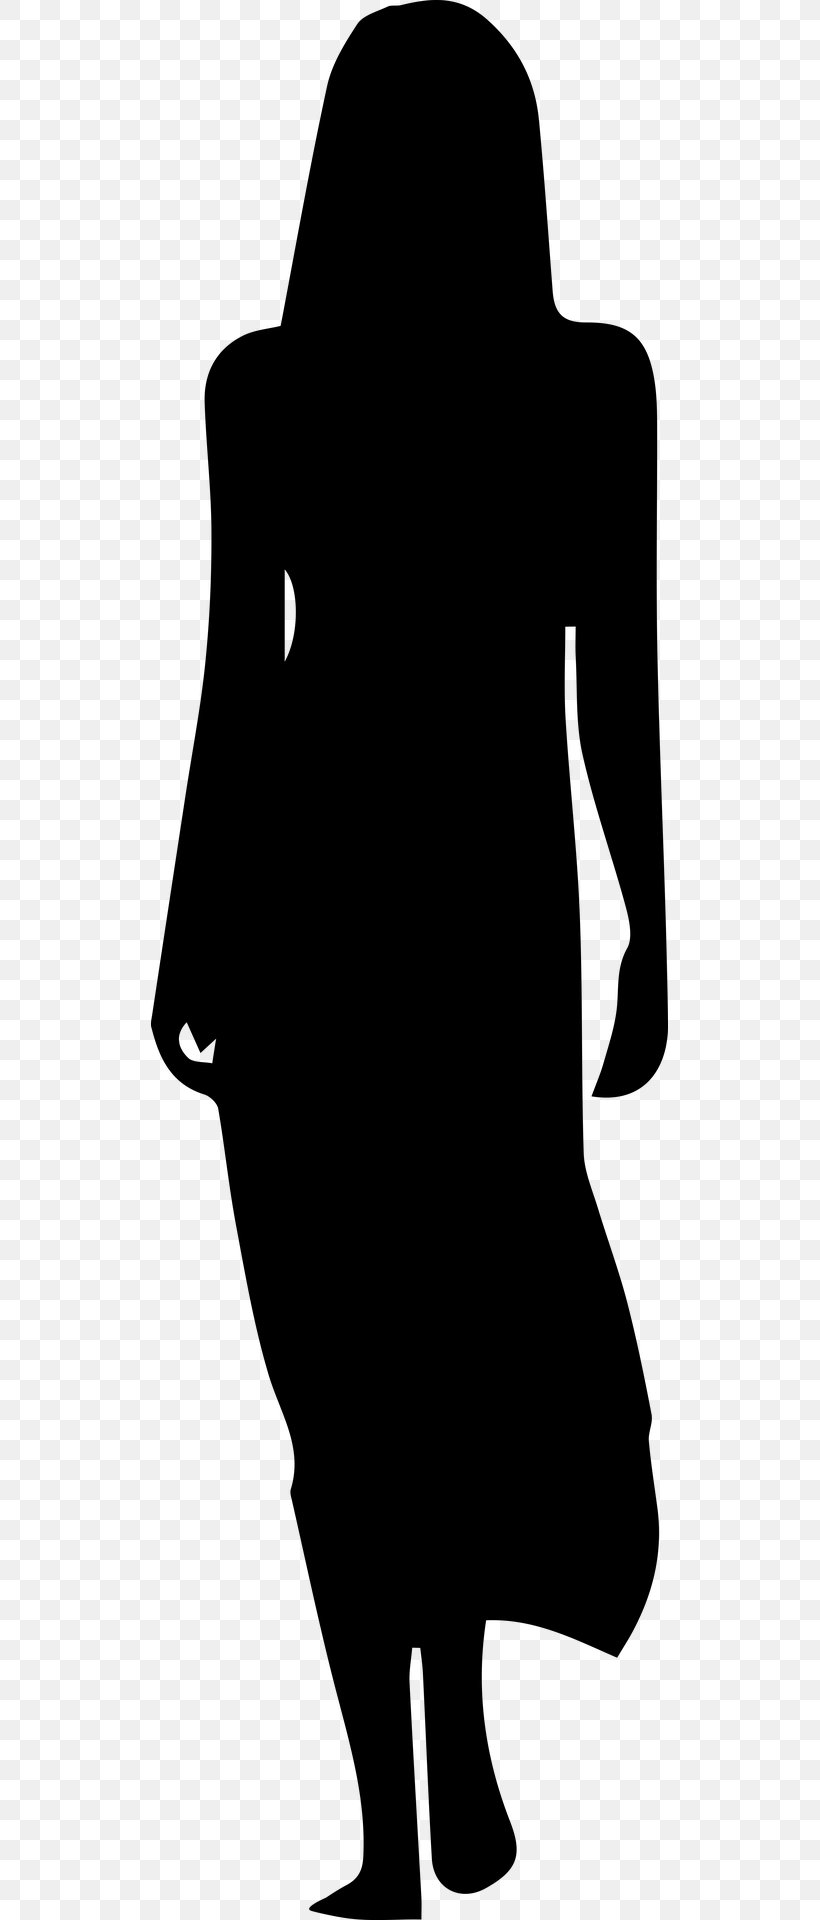 Dress Silhouette Woman Clip Art, PNG, 517x1920px, Dress, Artwork, Black, Black And White, Clothing Download Free